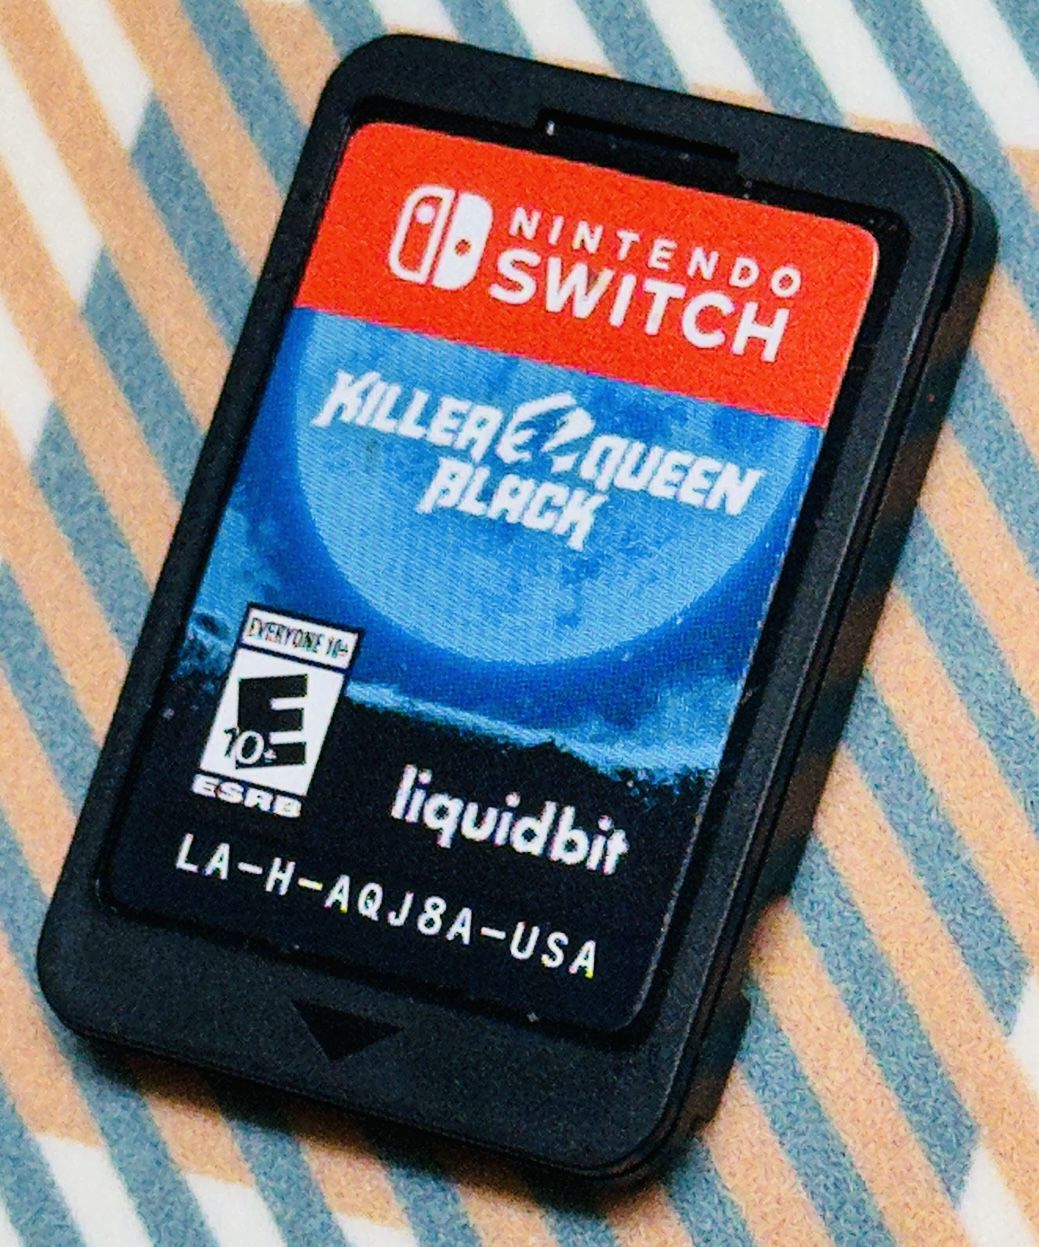 Killer Queen Black - Nintendo Switch  Tested/Working Game Only Tested